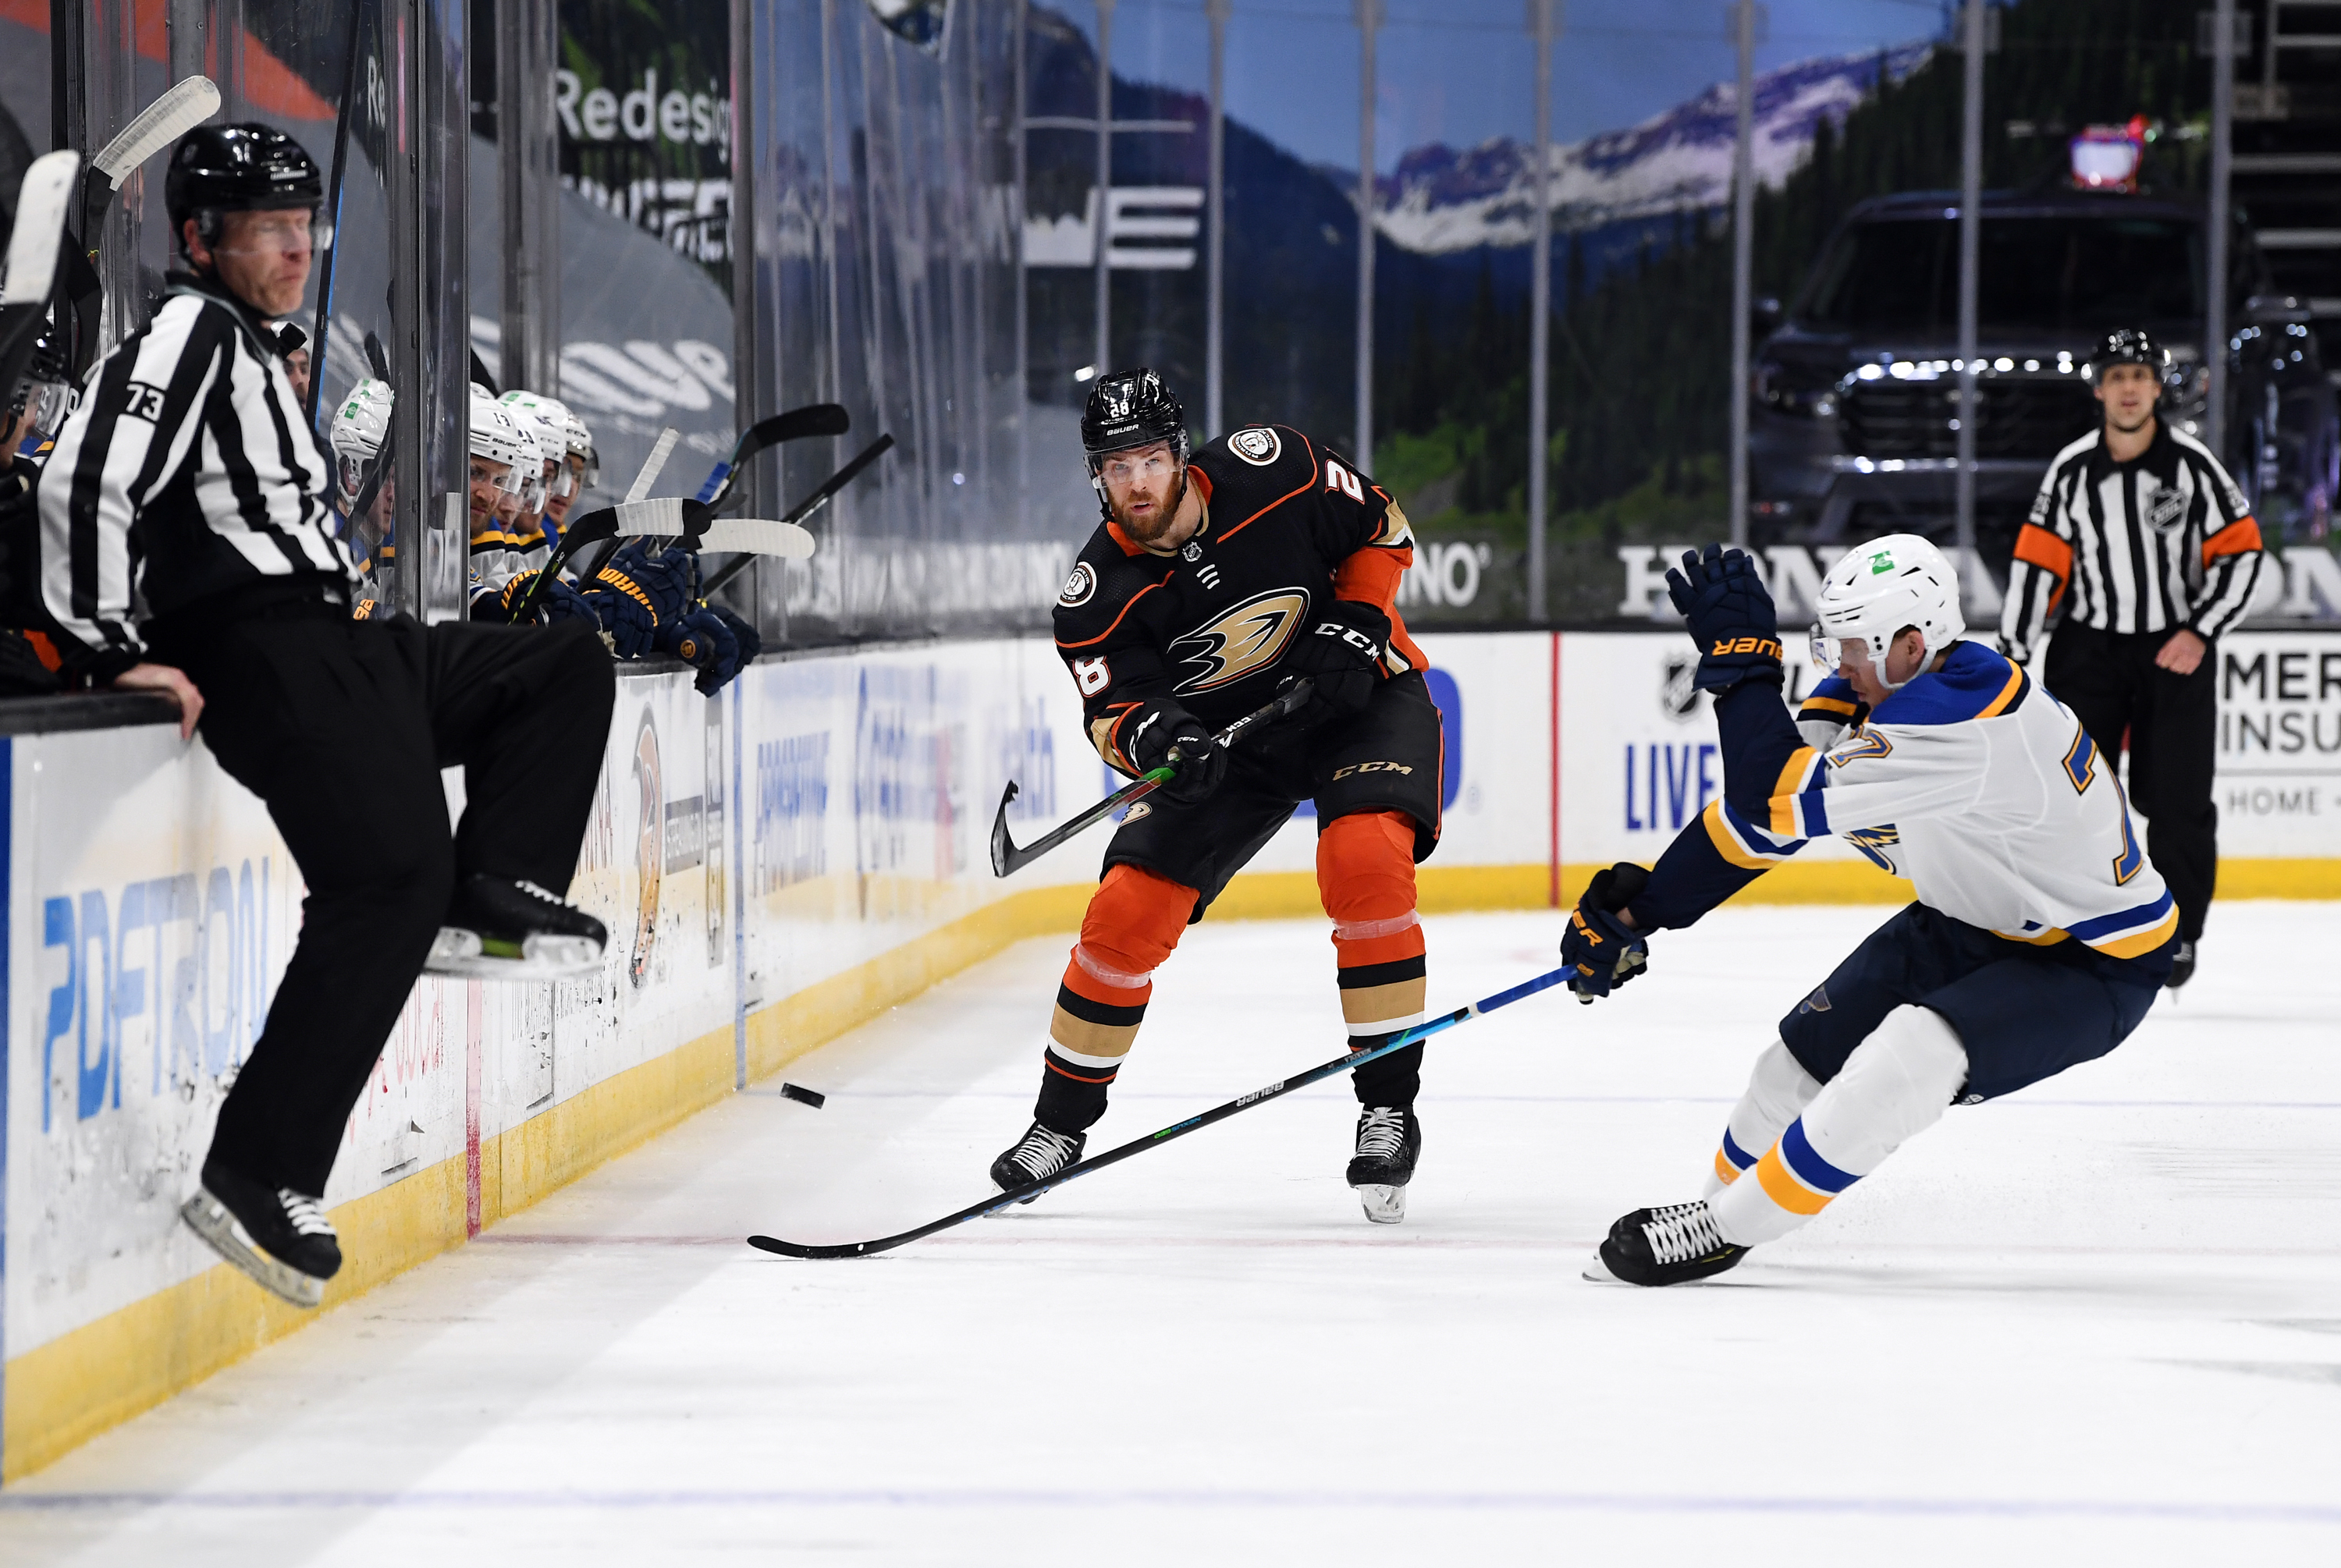 Anaheim Ducks Defenseman Jani Hakanpaa (28) clears the puck during the second period of a game against the St. Louis Blues played on January 31, 2021 at the Honda Center in Anaheim, CA.